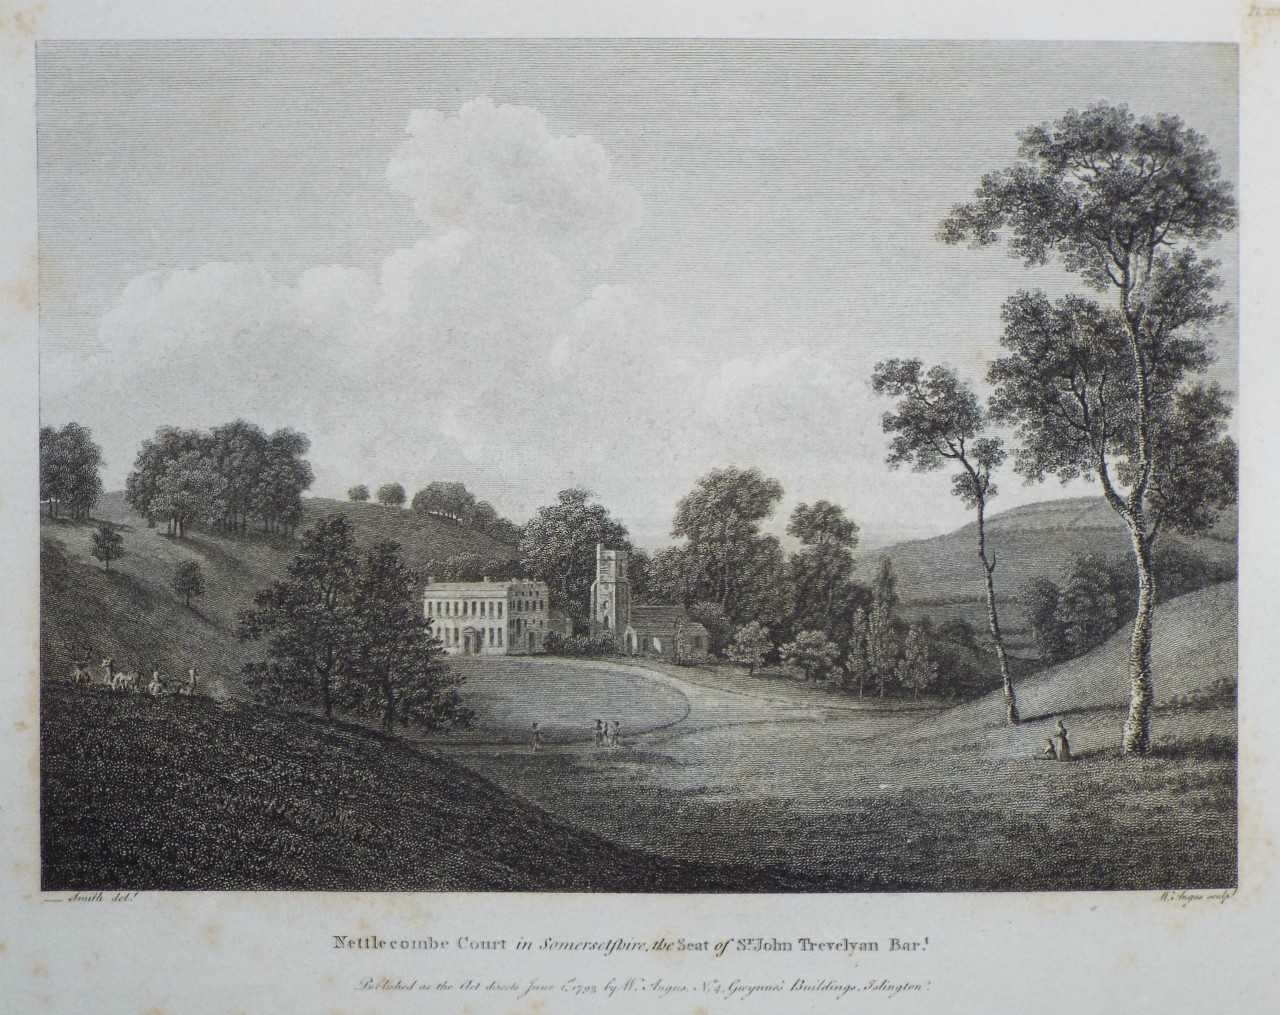 Print - Nettlecombe Court in Somersetshire, the Seat of Sir John Trevelyan Bart. - Angus